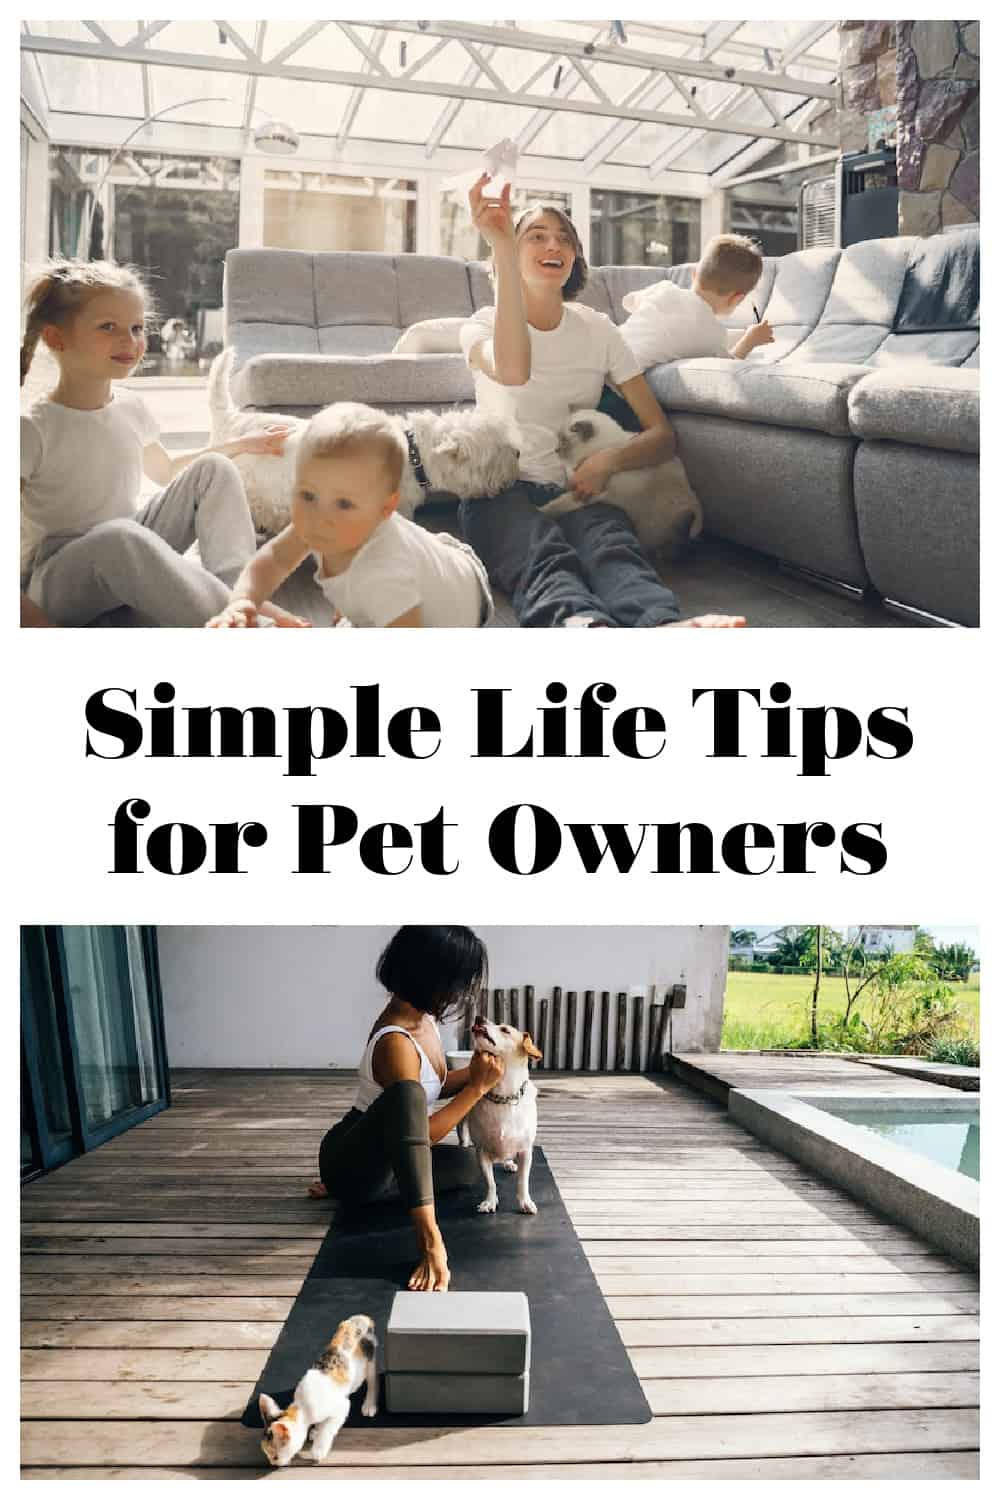 If you're looking for simple living tips, check out these simple life tips for pet owners. Here are my favorite ways to have less stress as a pet owner.